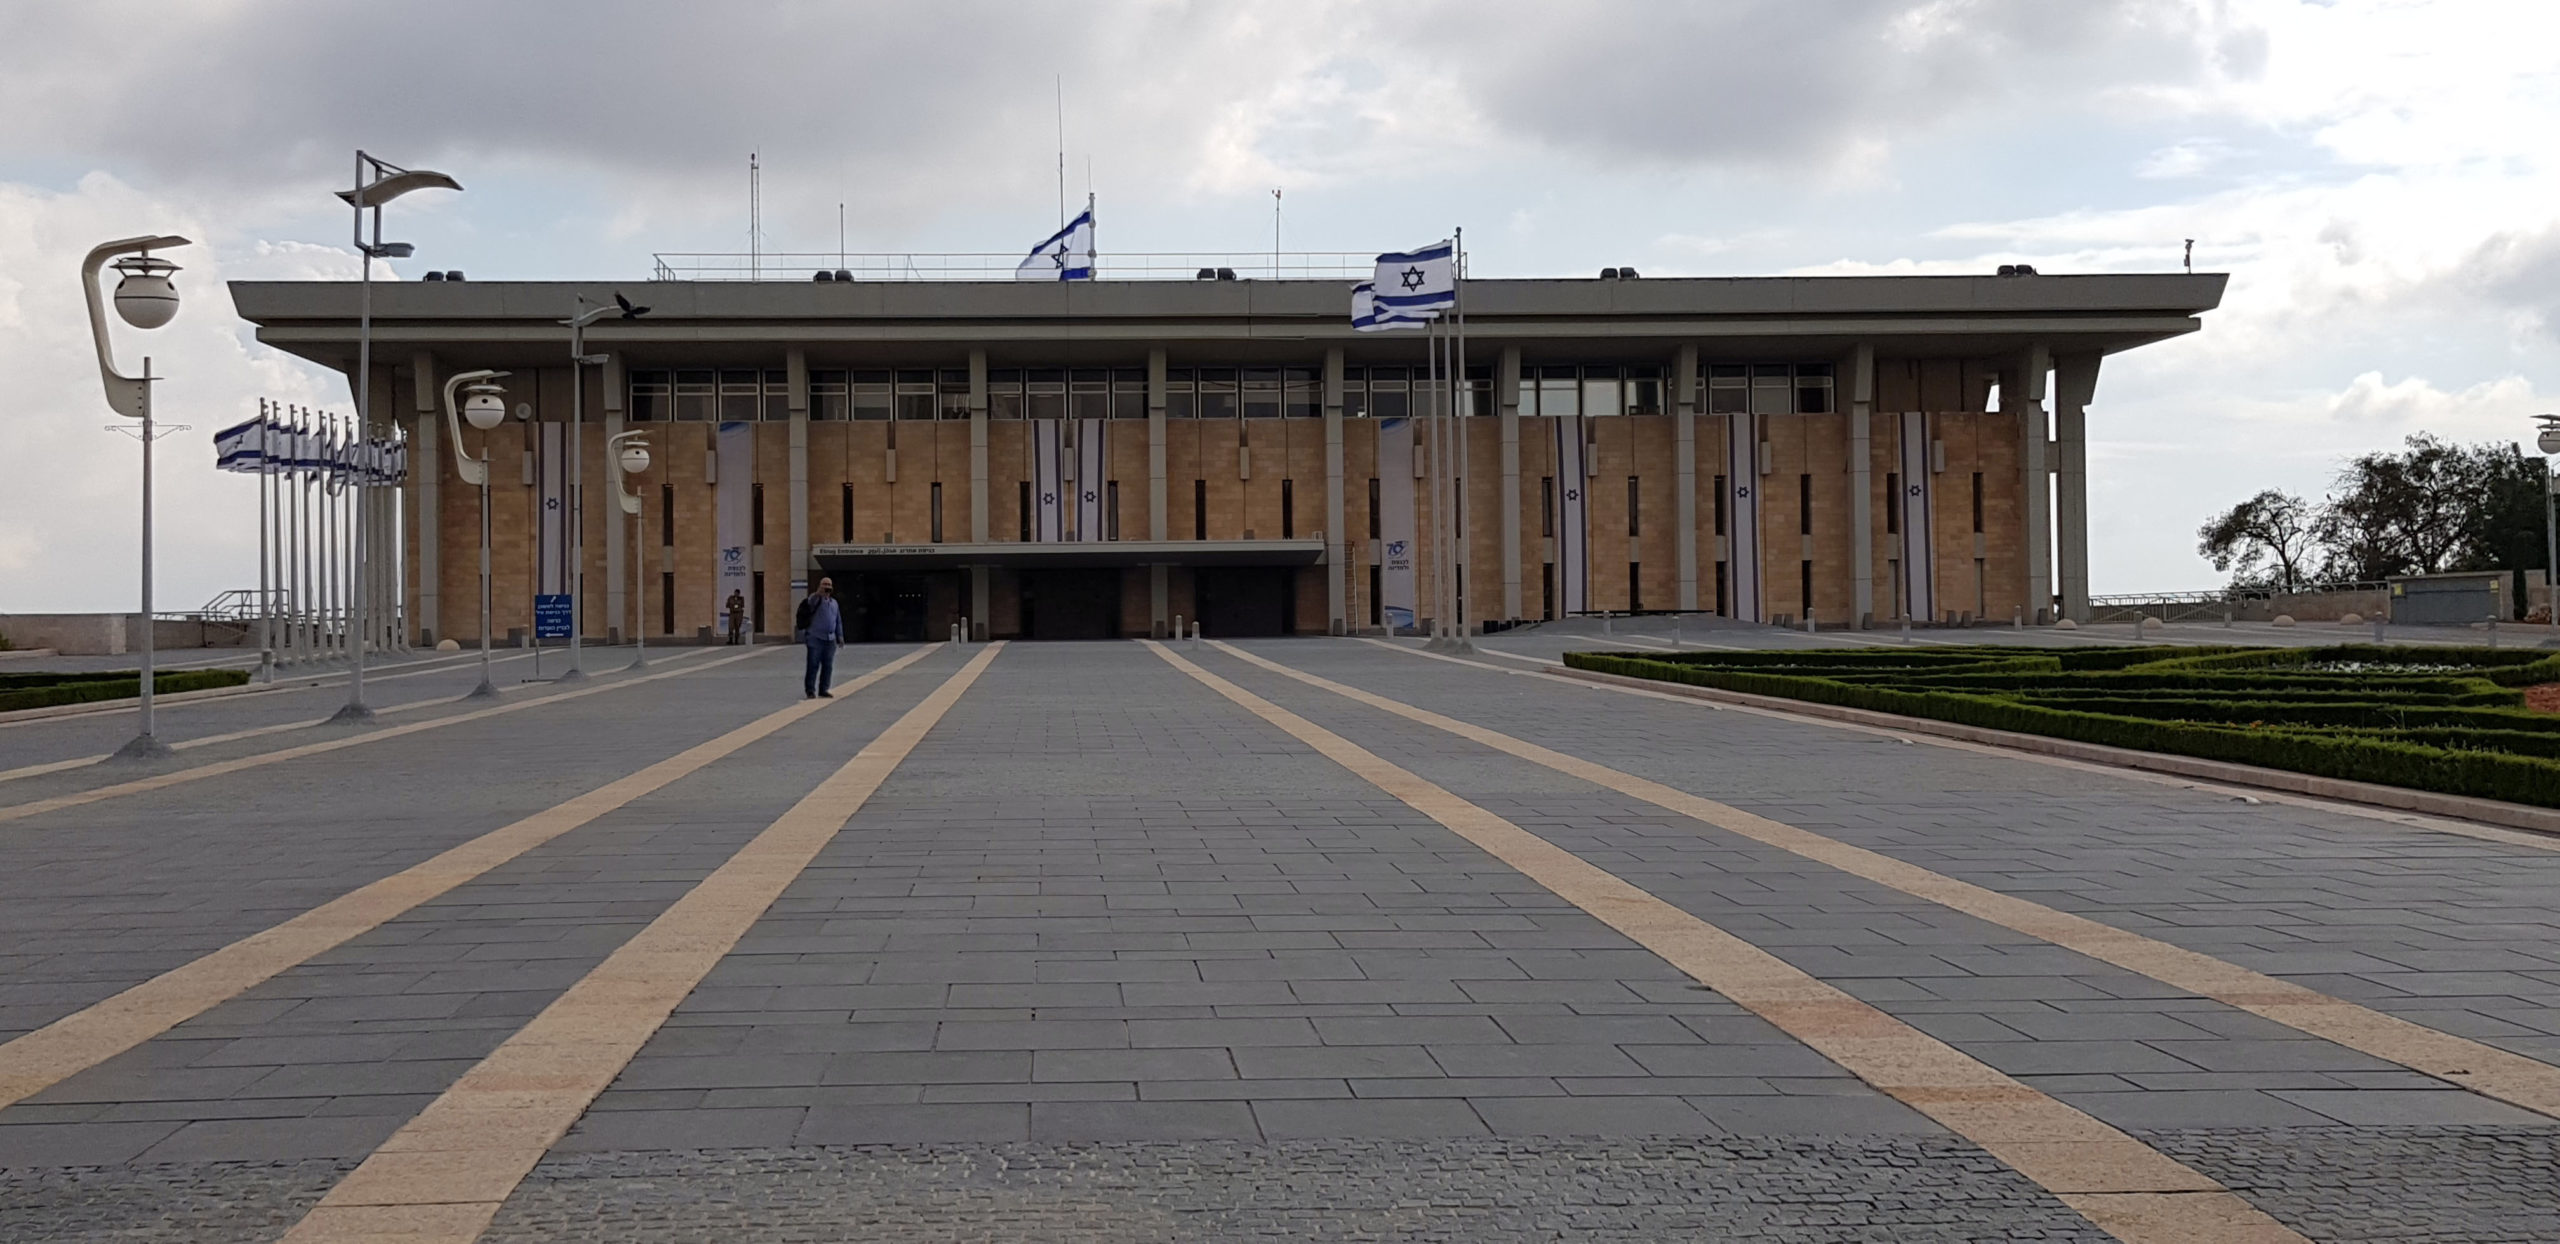 As 4th Round of Elections Looms, No Israeli Leader Has Clear Path to Prime Ministry